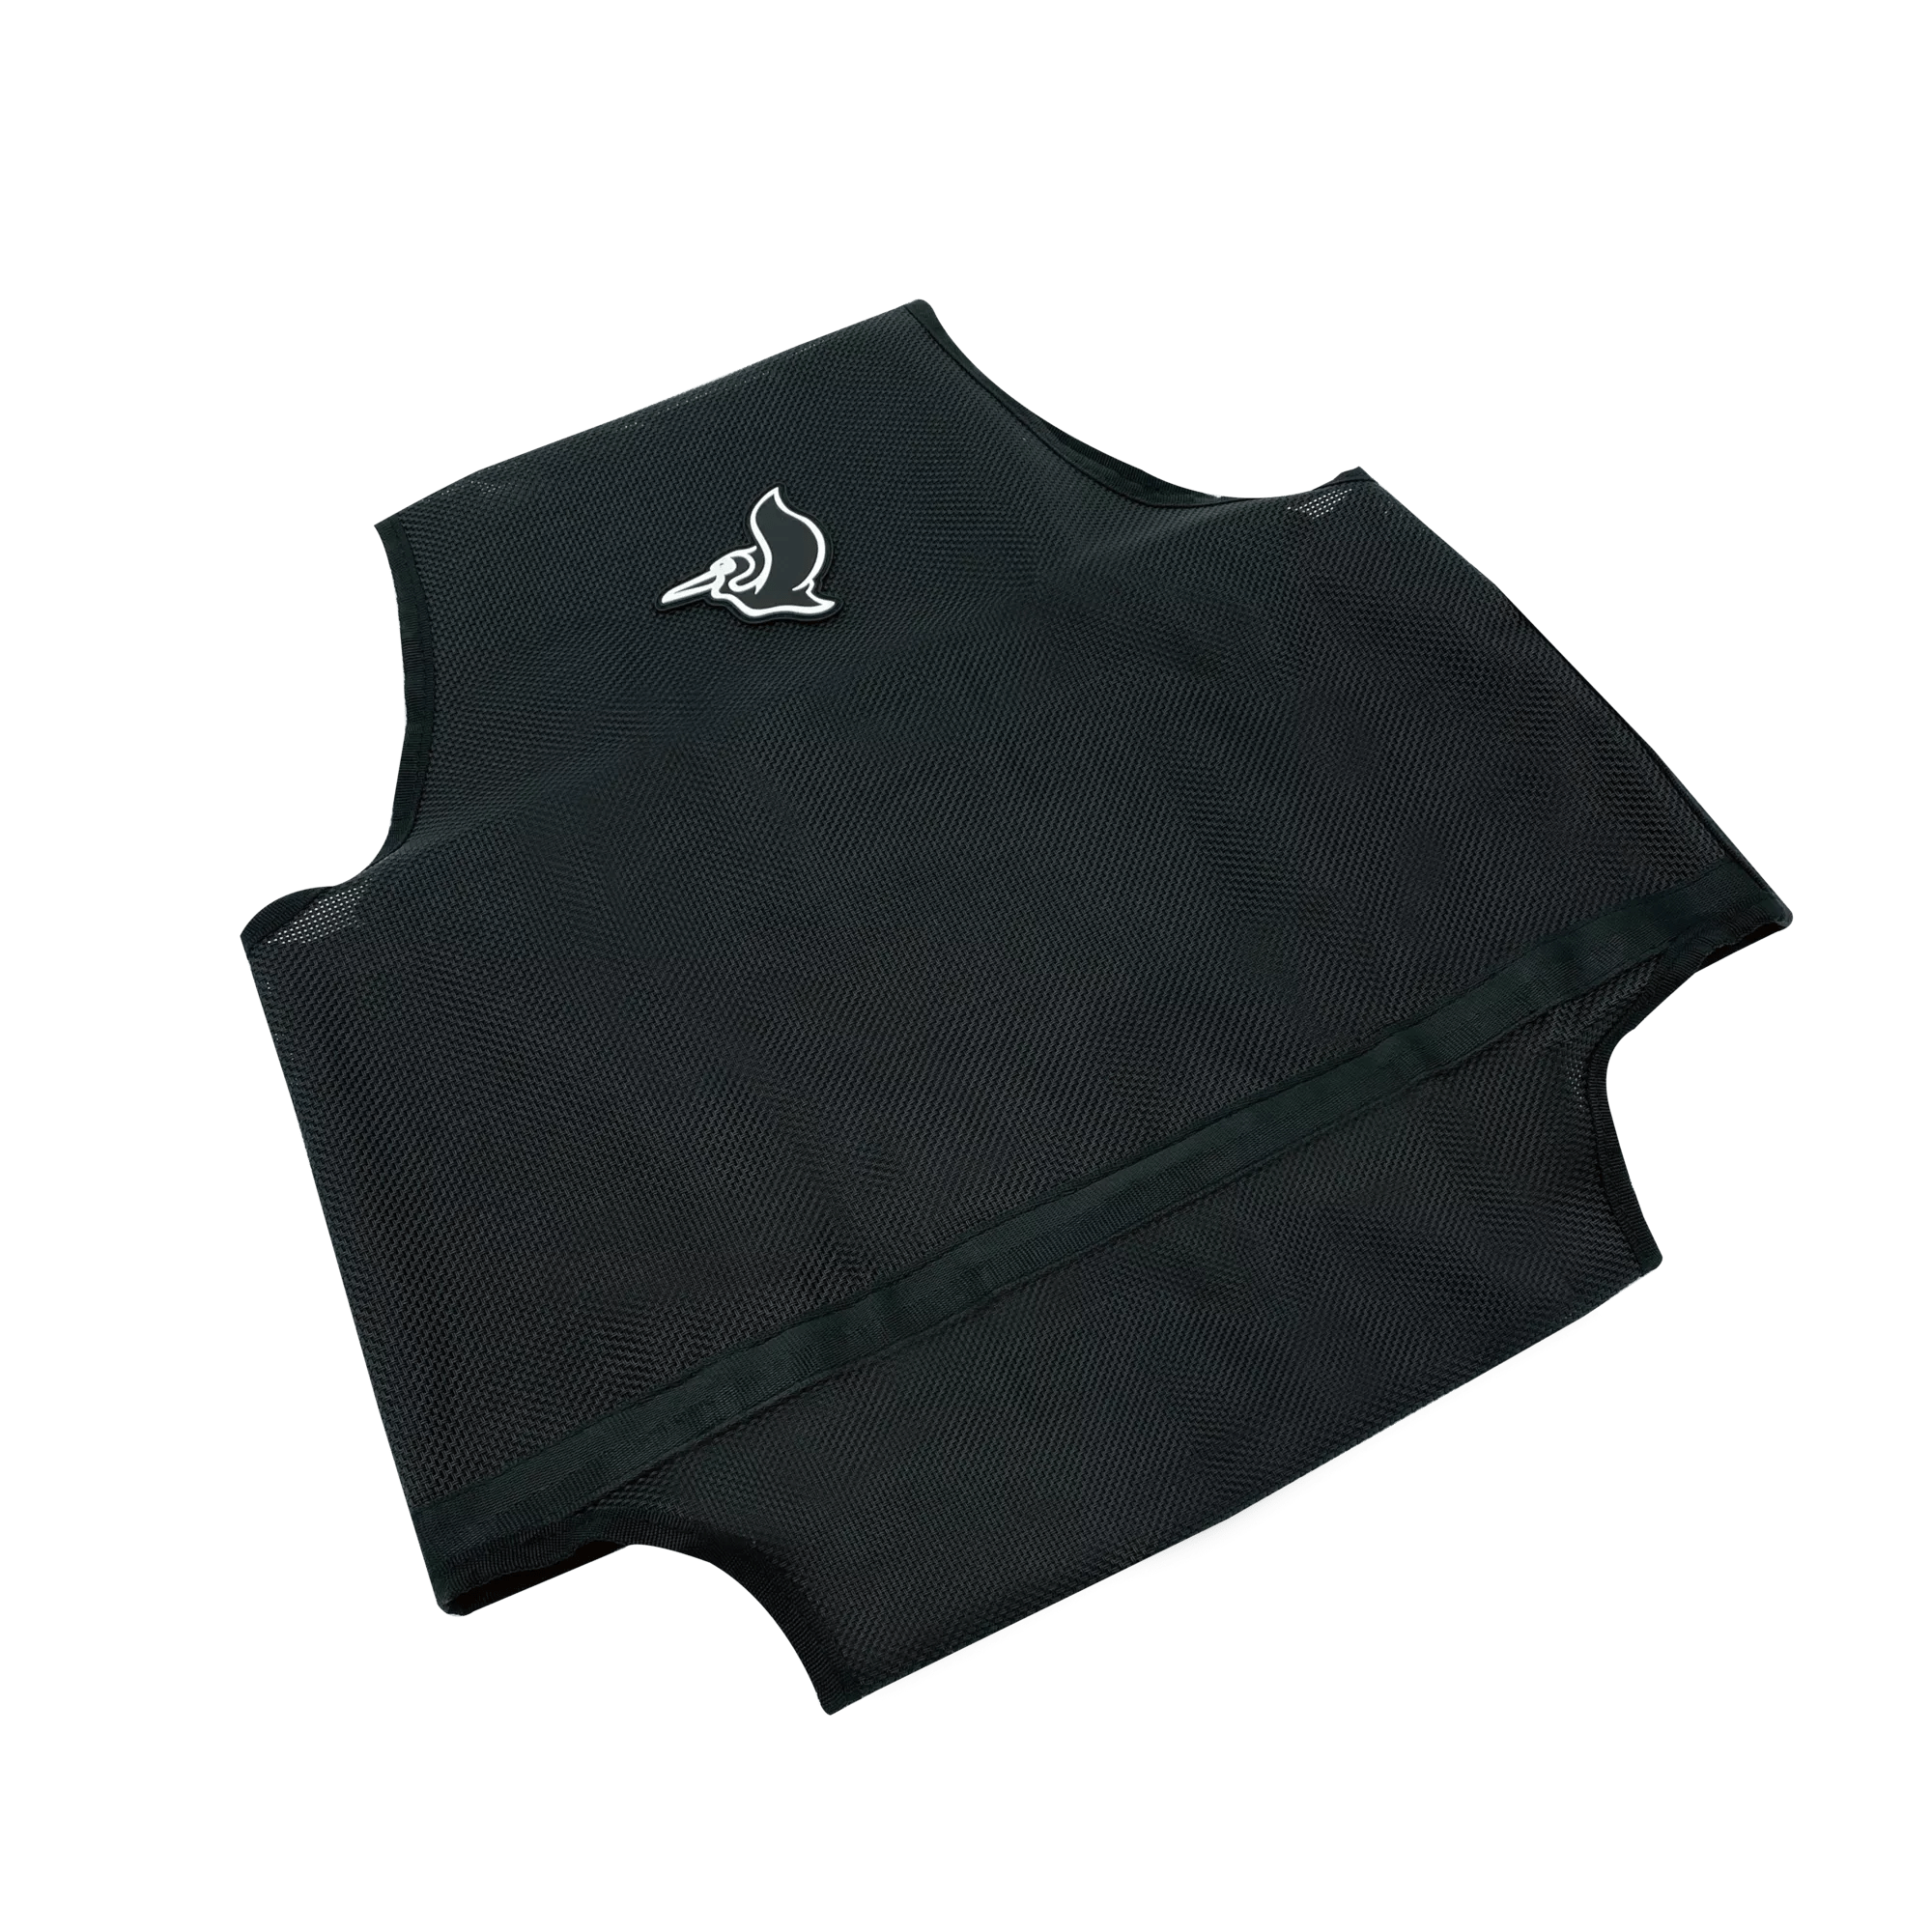 PELICAN - Ergocoast XP Seat Cover -  - PS3005 - ISO